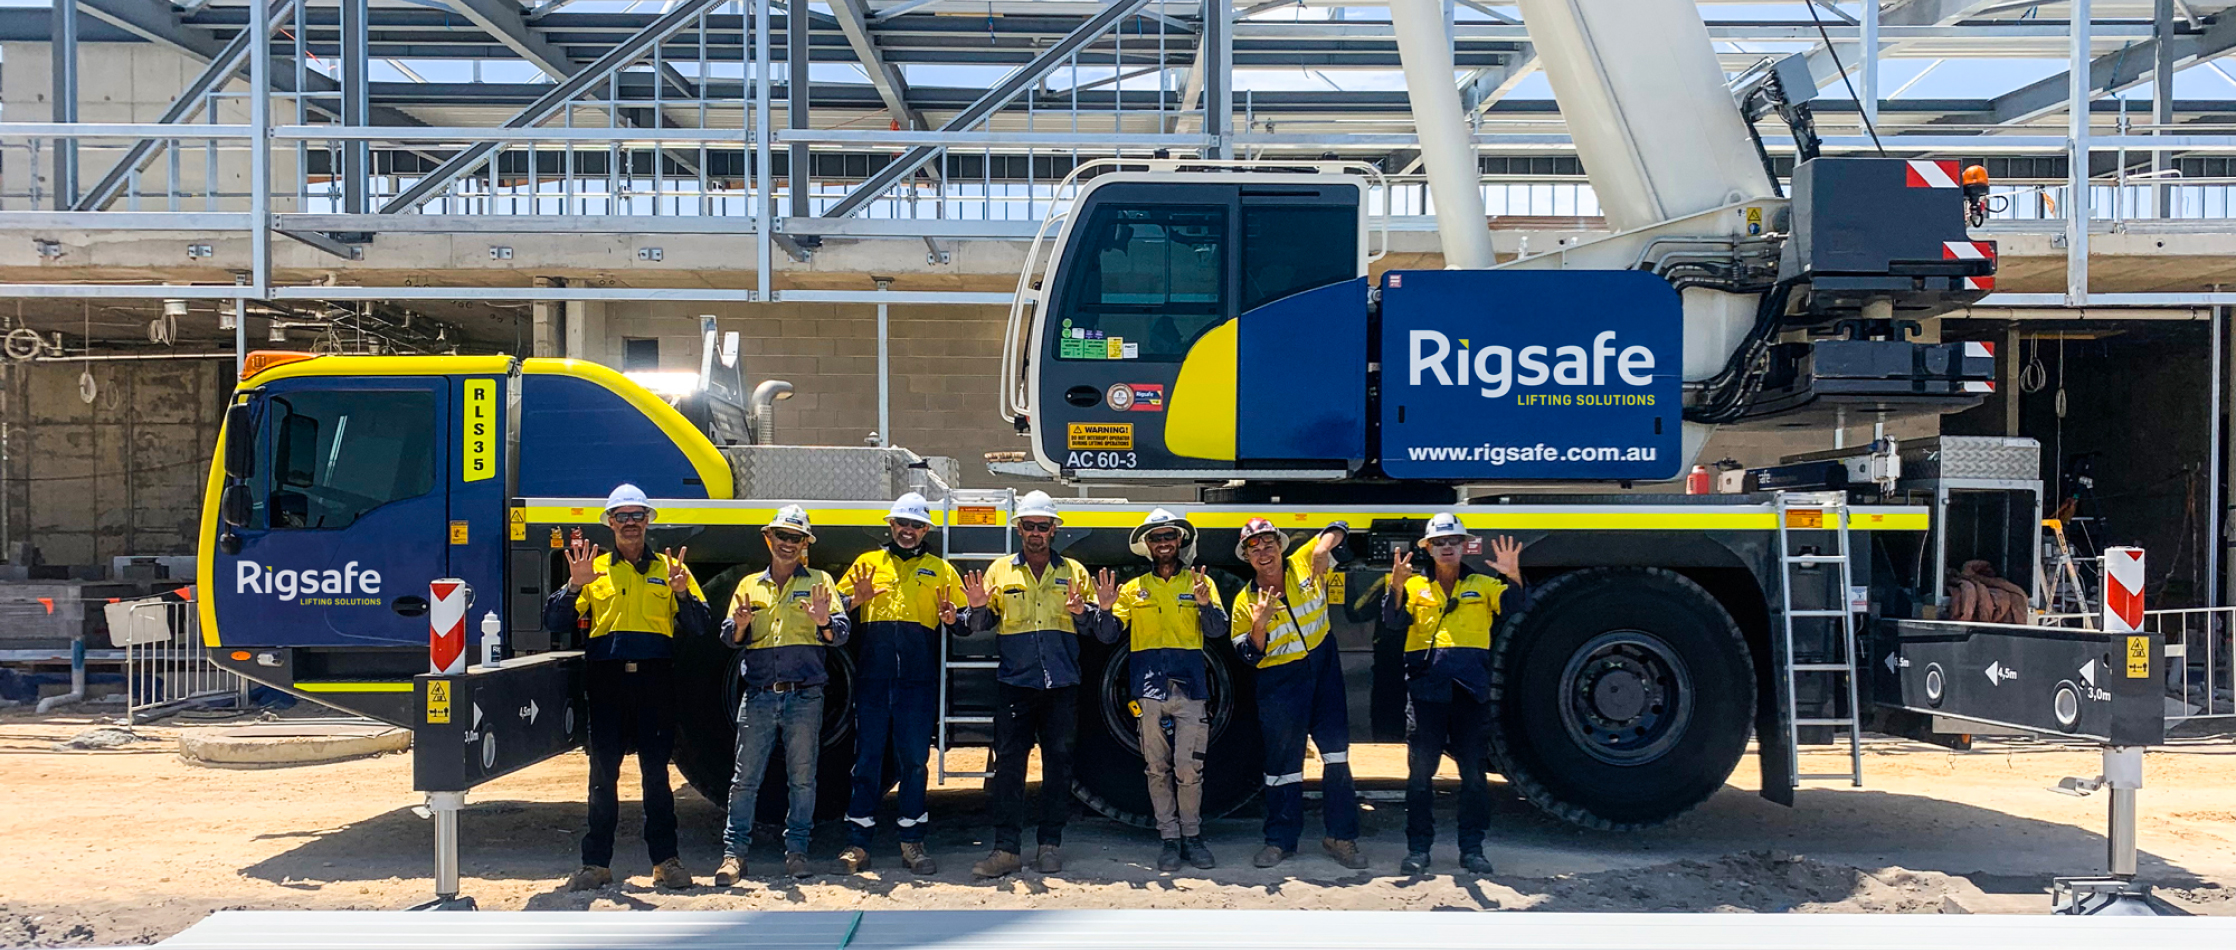 Rigsafe team stand in front of Rigsafe Crane